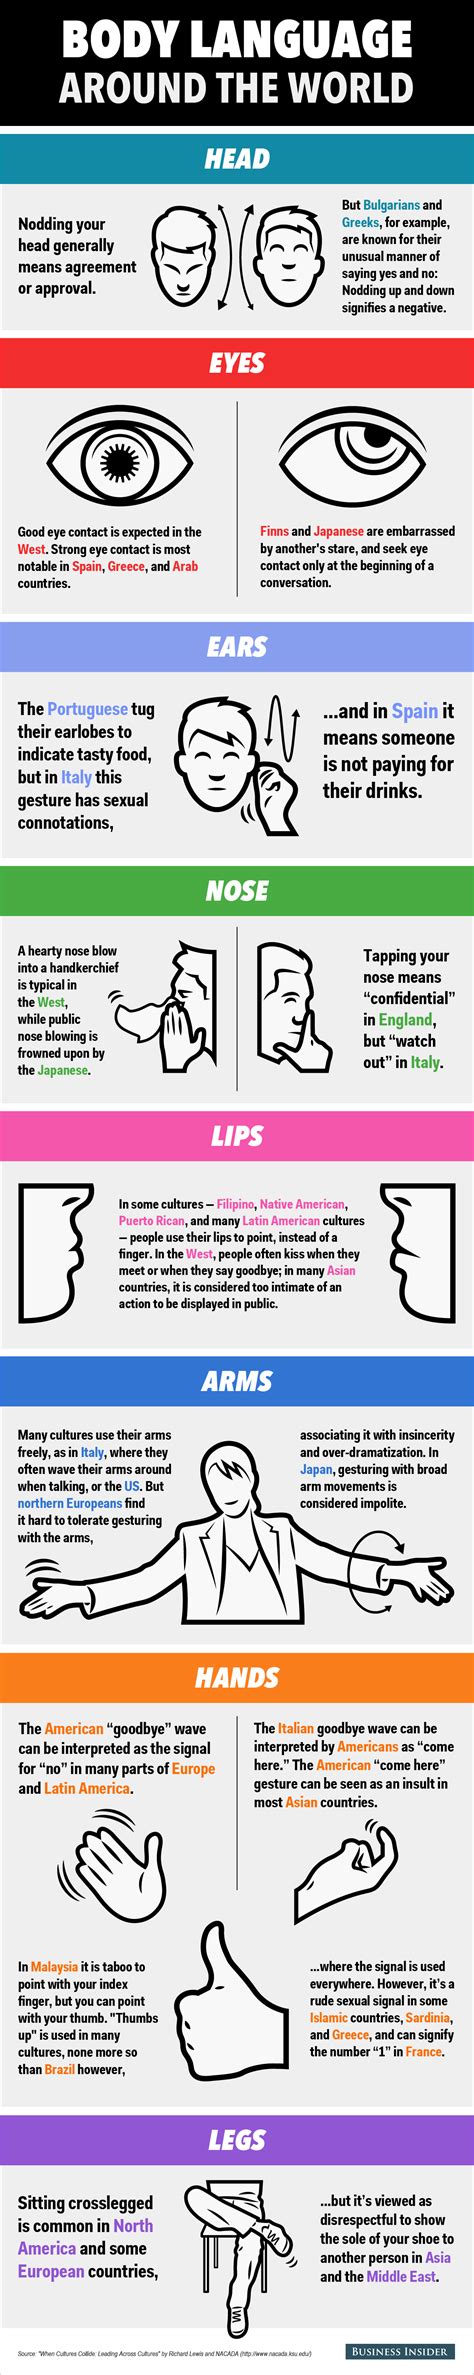 you-ll-be-shocked-by-the-differences-in-basic-body-language-around-the-world